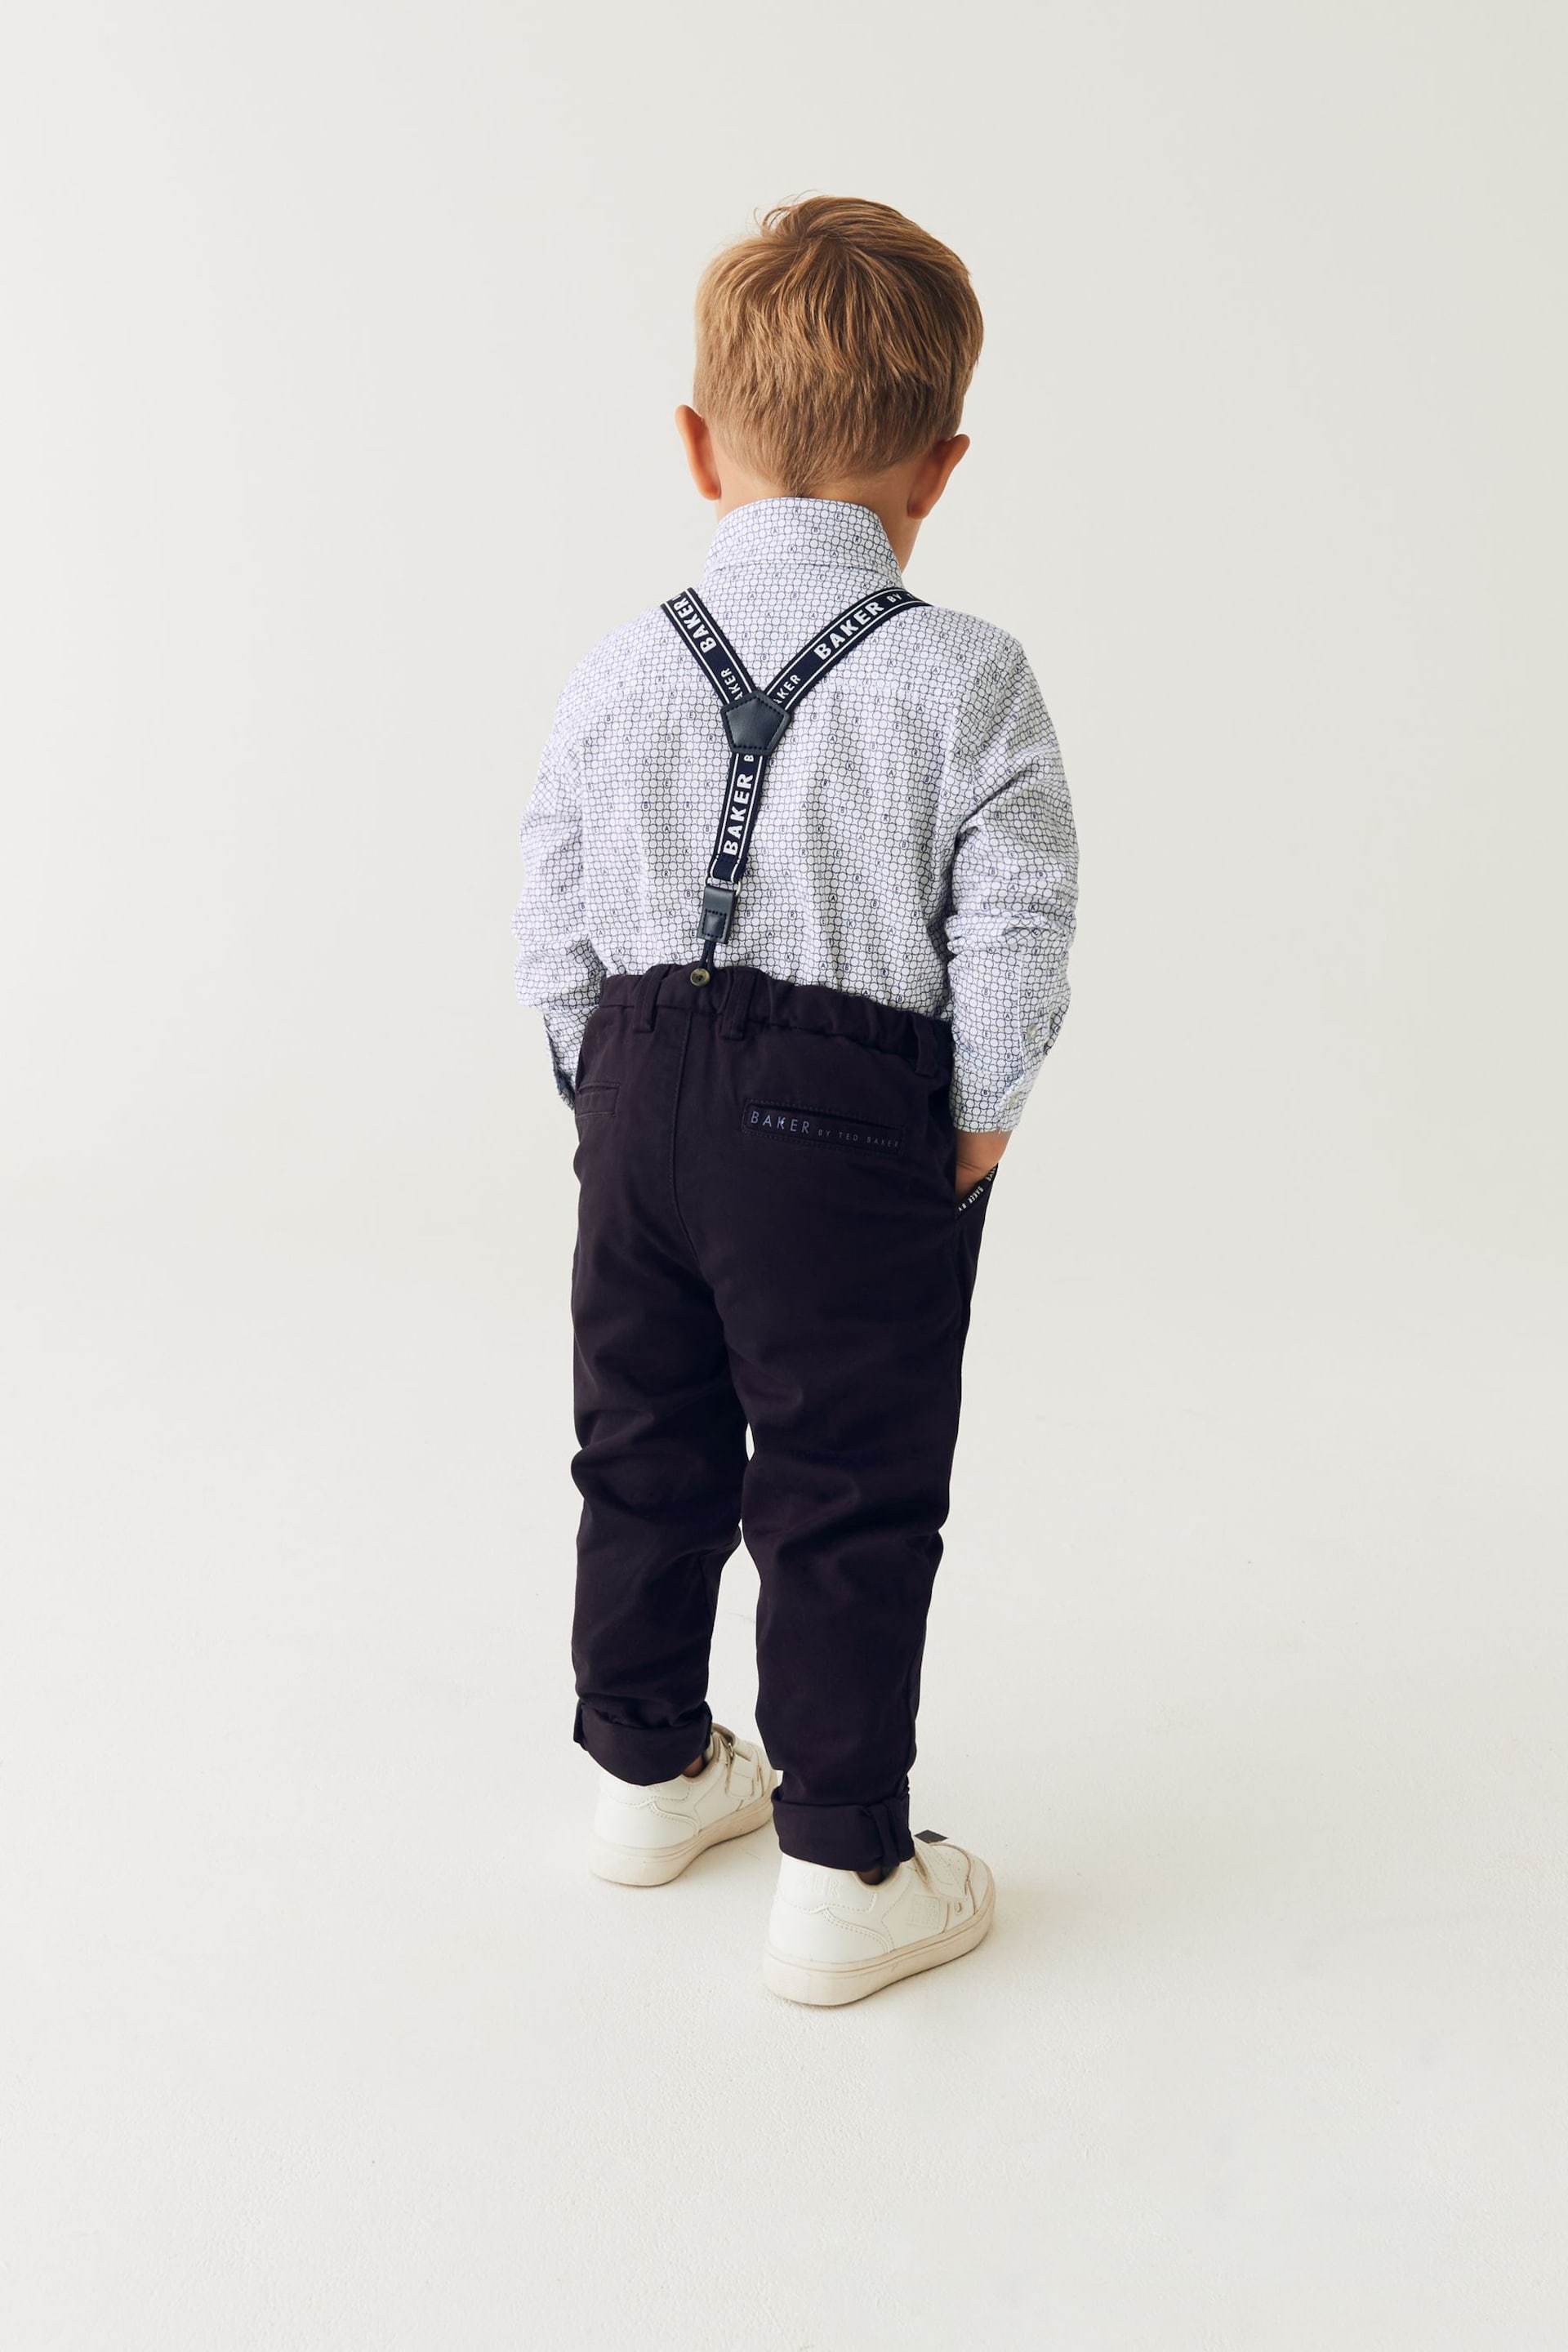 Baker by Ted Baker (3mths-6yrs) Shirt, Braces and Chino Set - Image 3 of 14